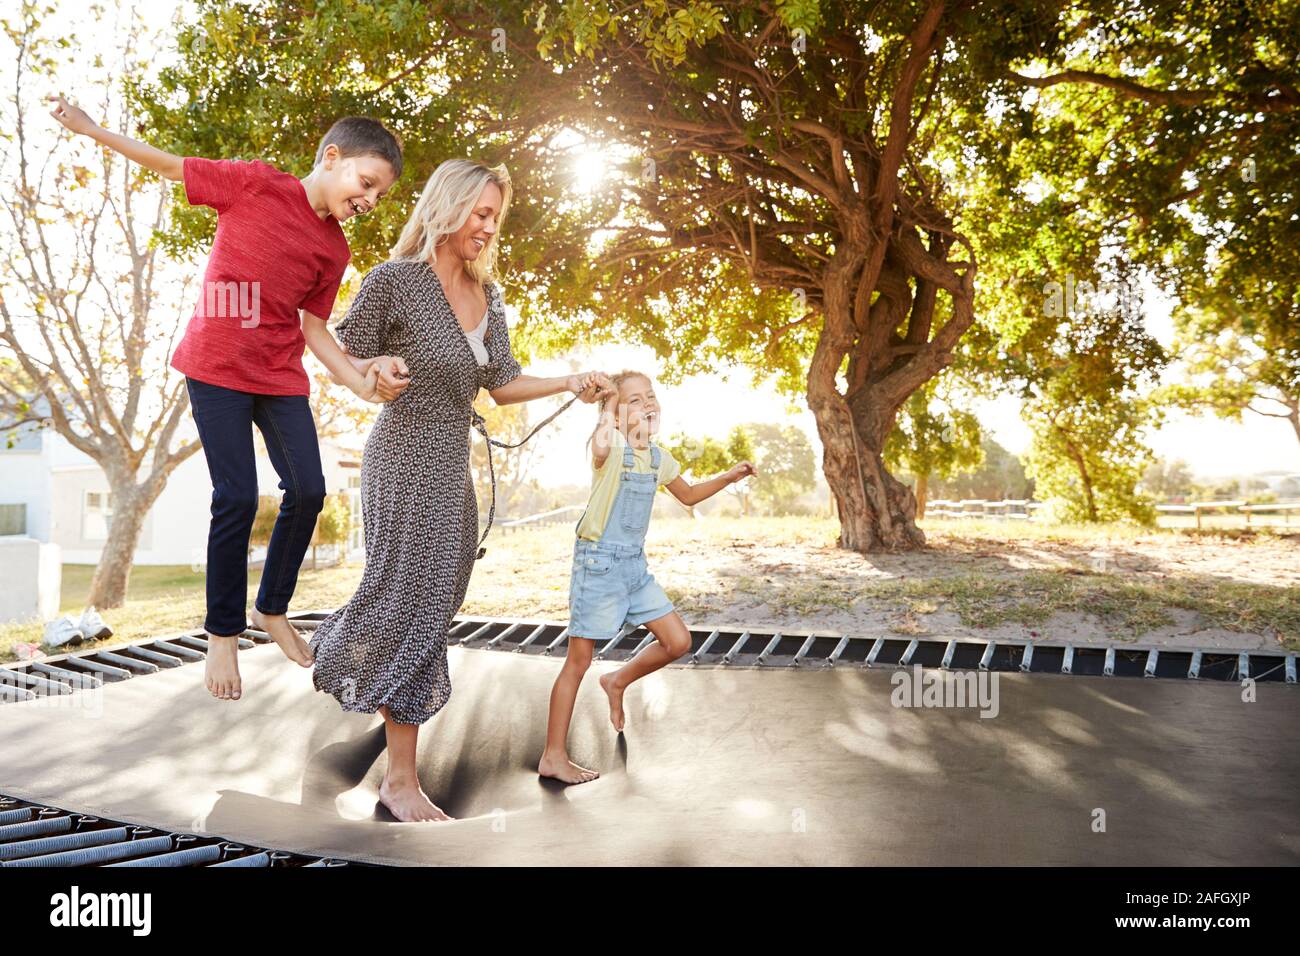 Mother Playing With Children On Outdoor Trampoline In Garden Stock Photo